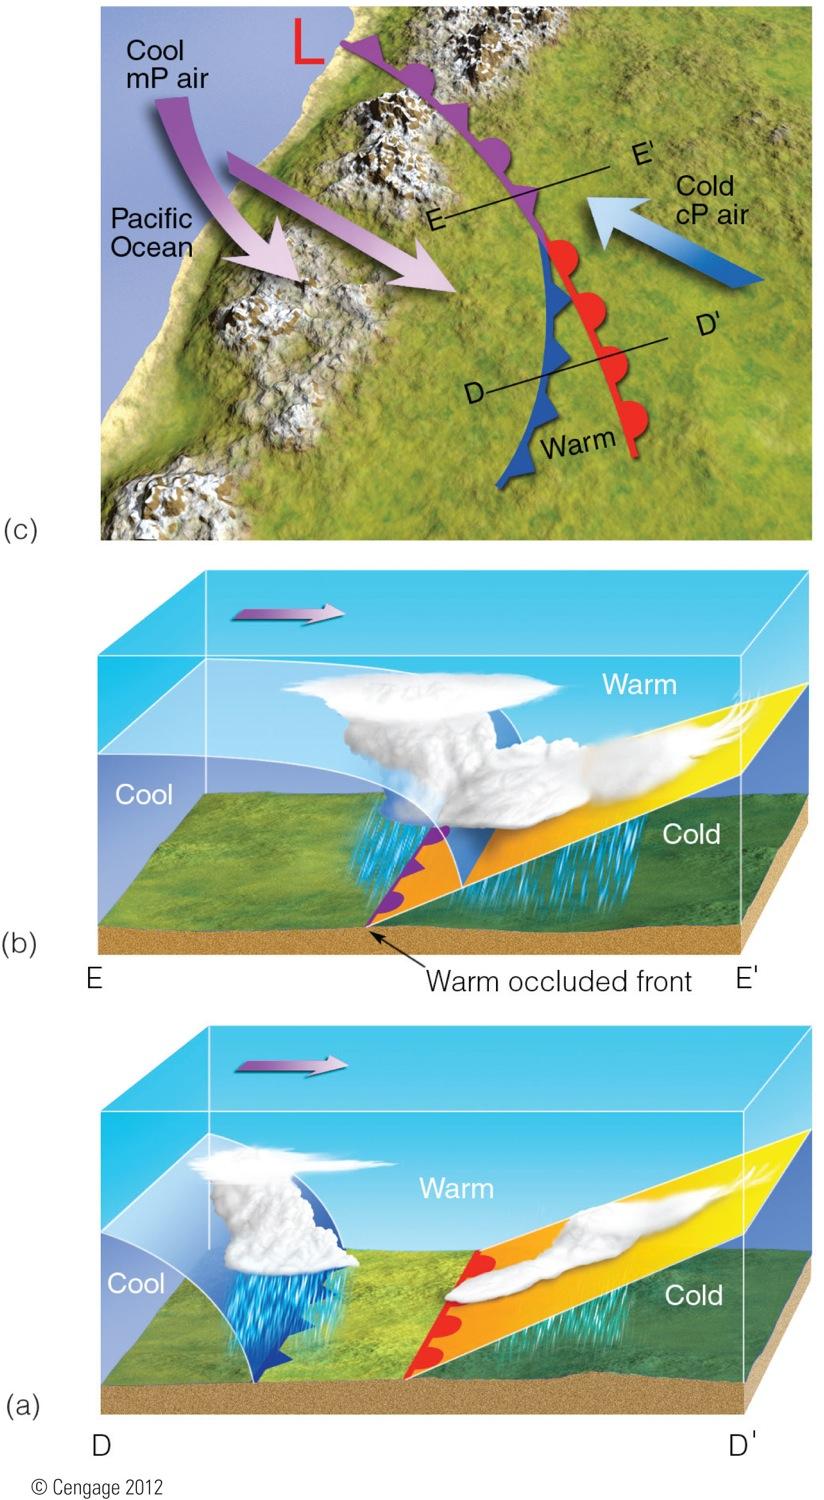 Warm occlusion: An occluded front with colder air ahead of the occluded front How does the weather change as a warm